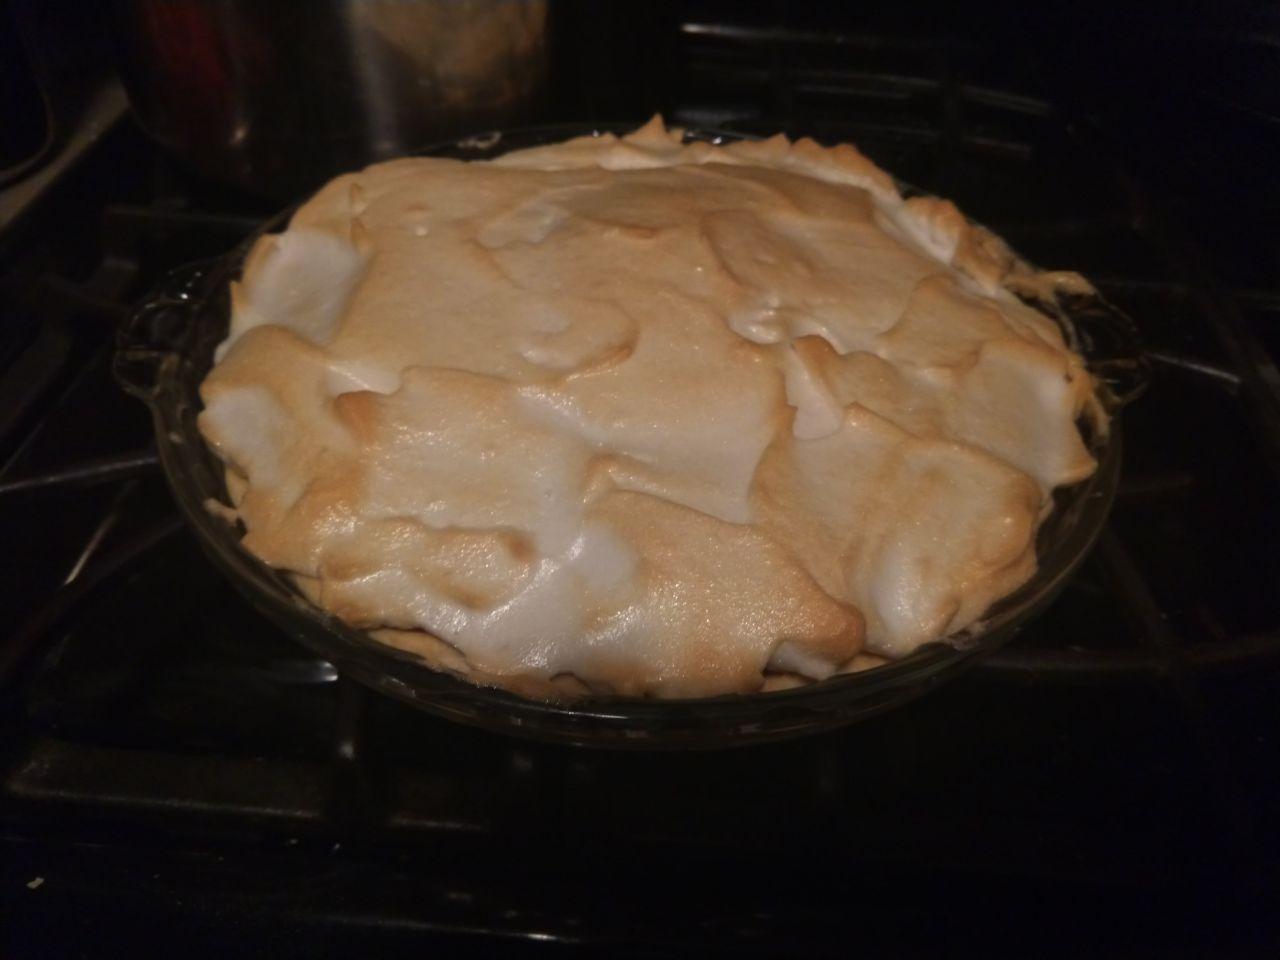 Completed cocoa pie with meringue.